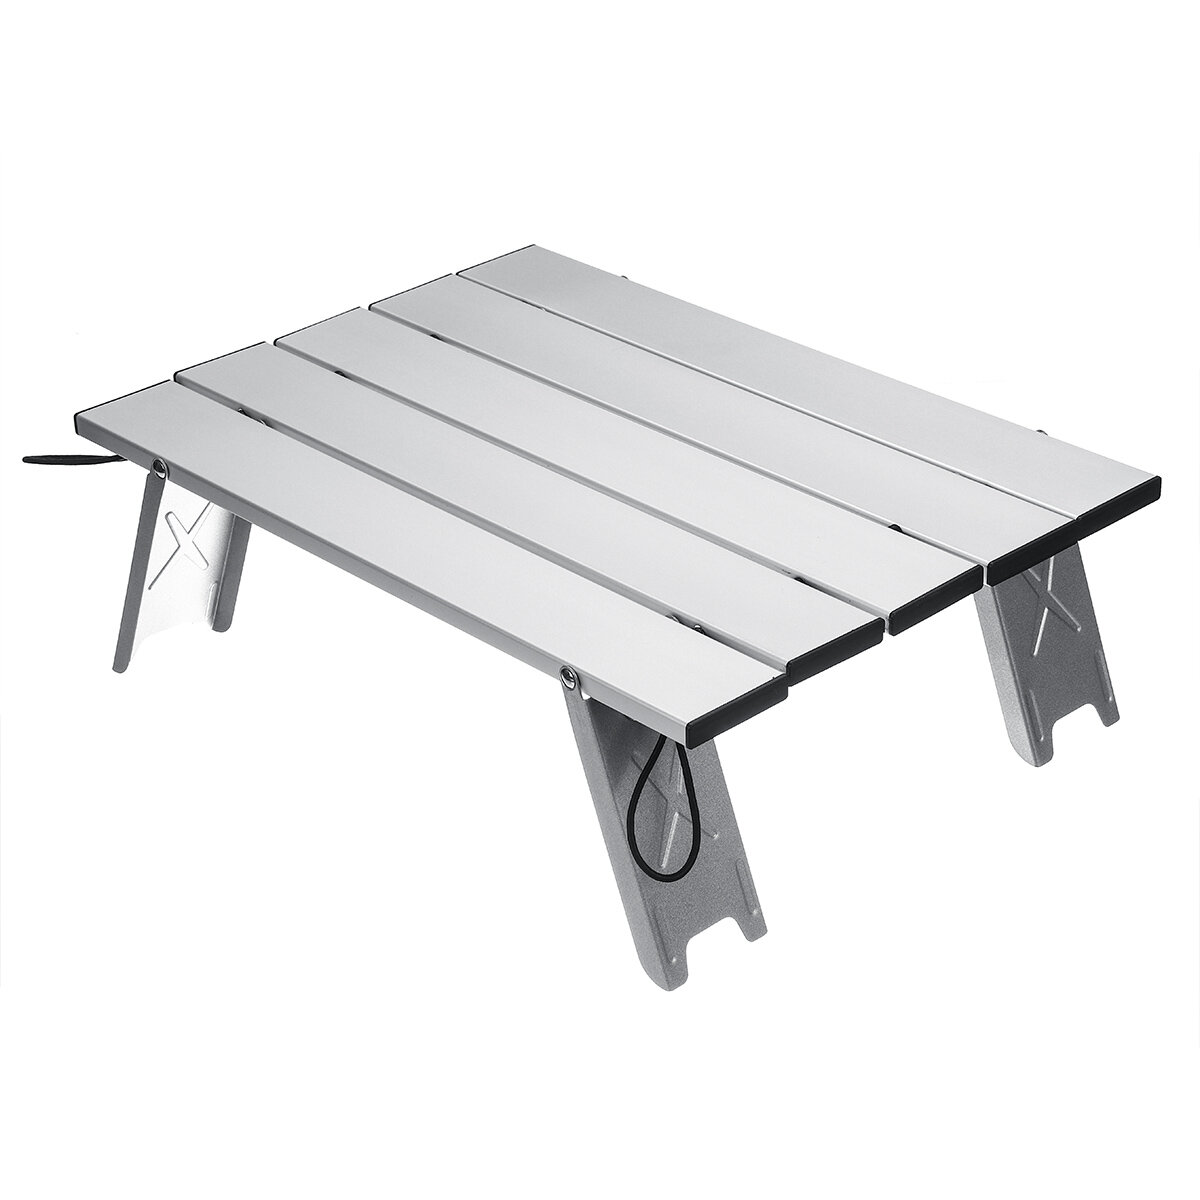 Portable Outdoor Folding Table Chair Camping Aluminium Alloy Picnic Table Waterproof Ultra-light Durable Table 40x29x12cm